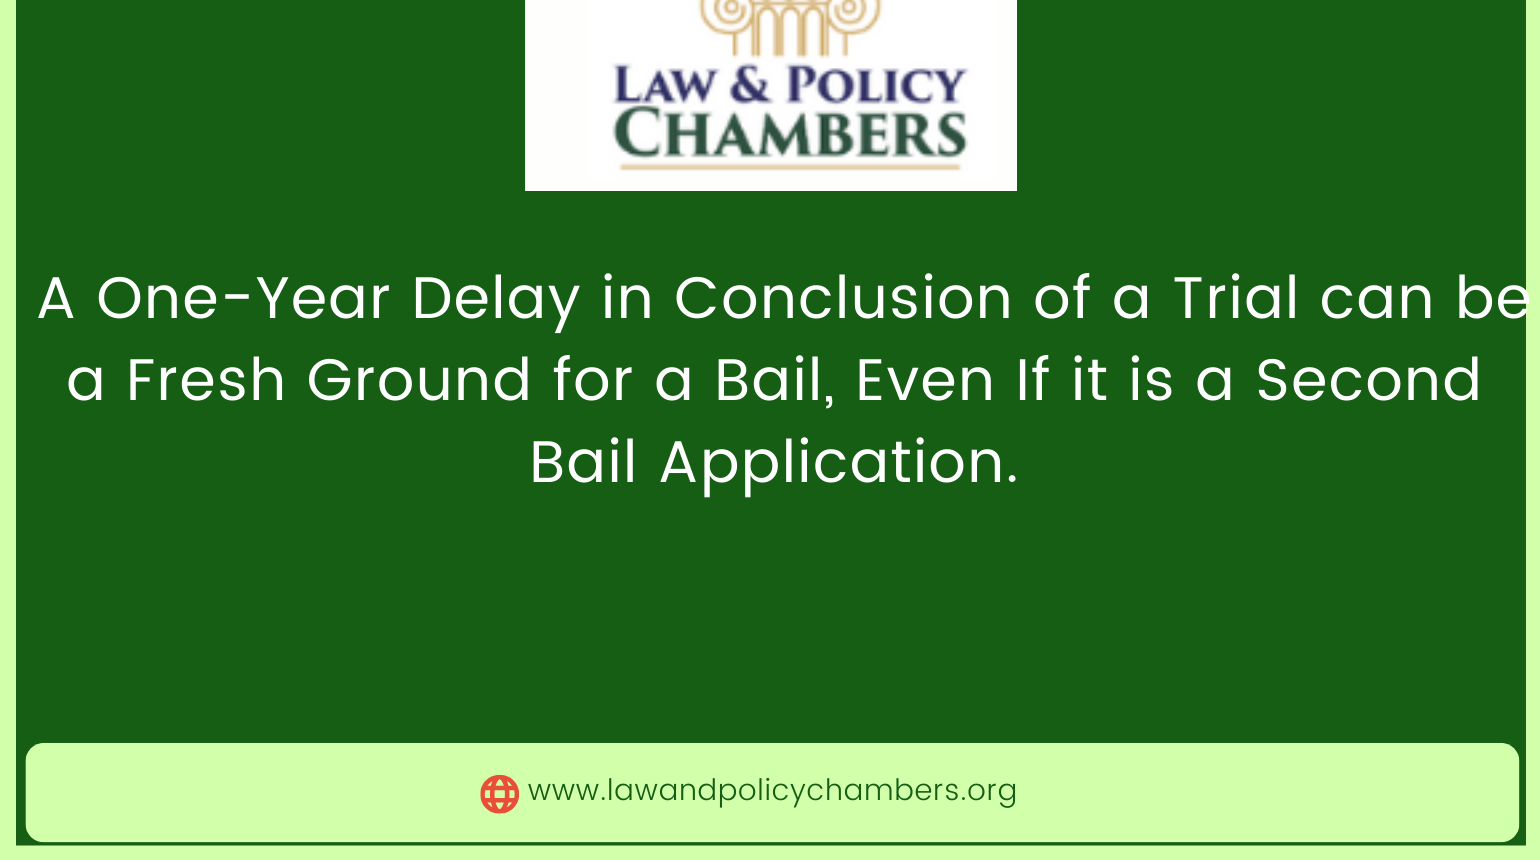 A One-Year Delay in Conclusion of a Trial can be a Fresh Ground for the Second Bail Application. SC